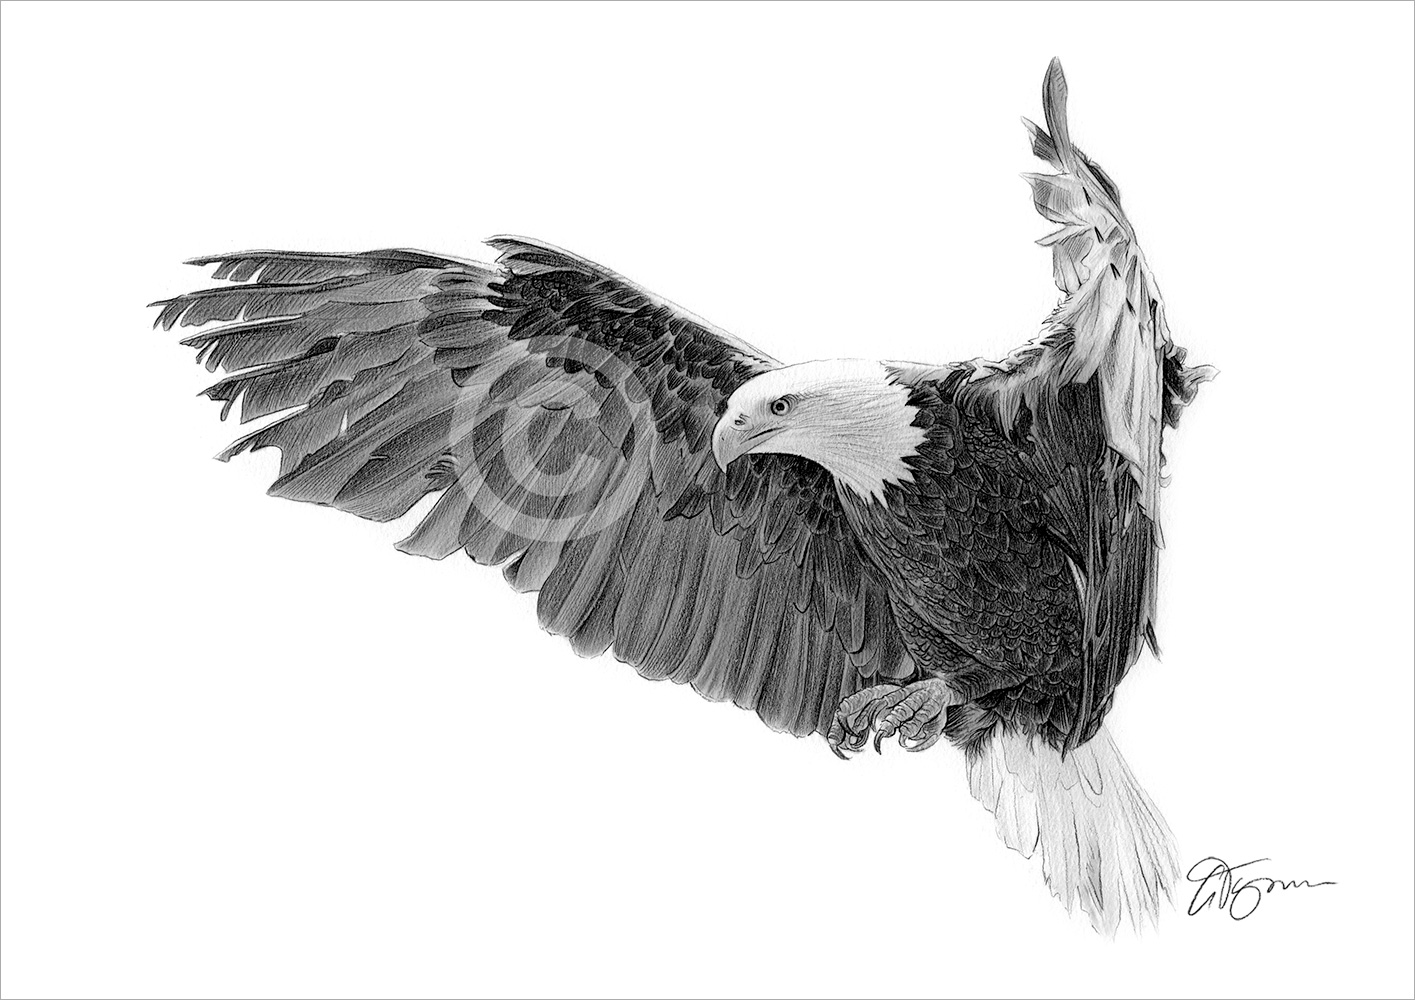 Pencil drawing of a bald eagle in flight by artist Gary Tymon